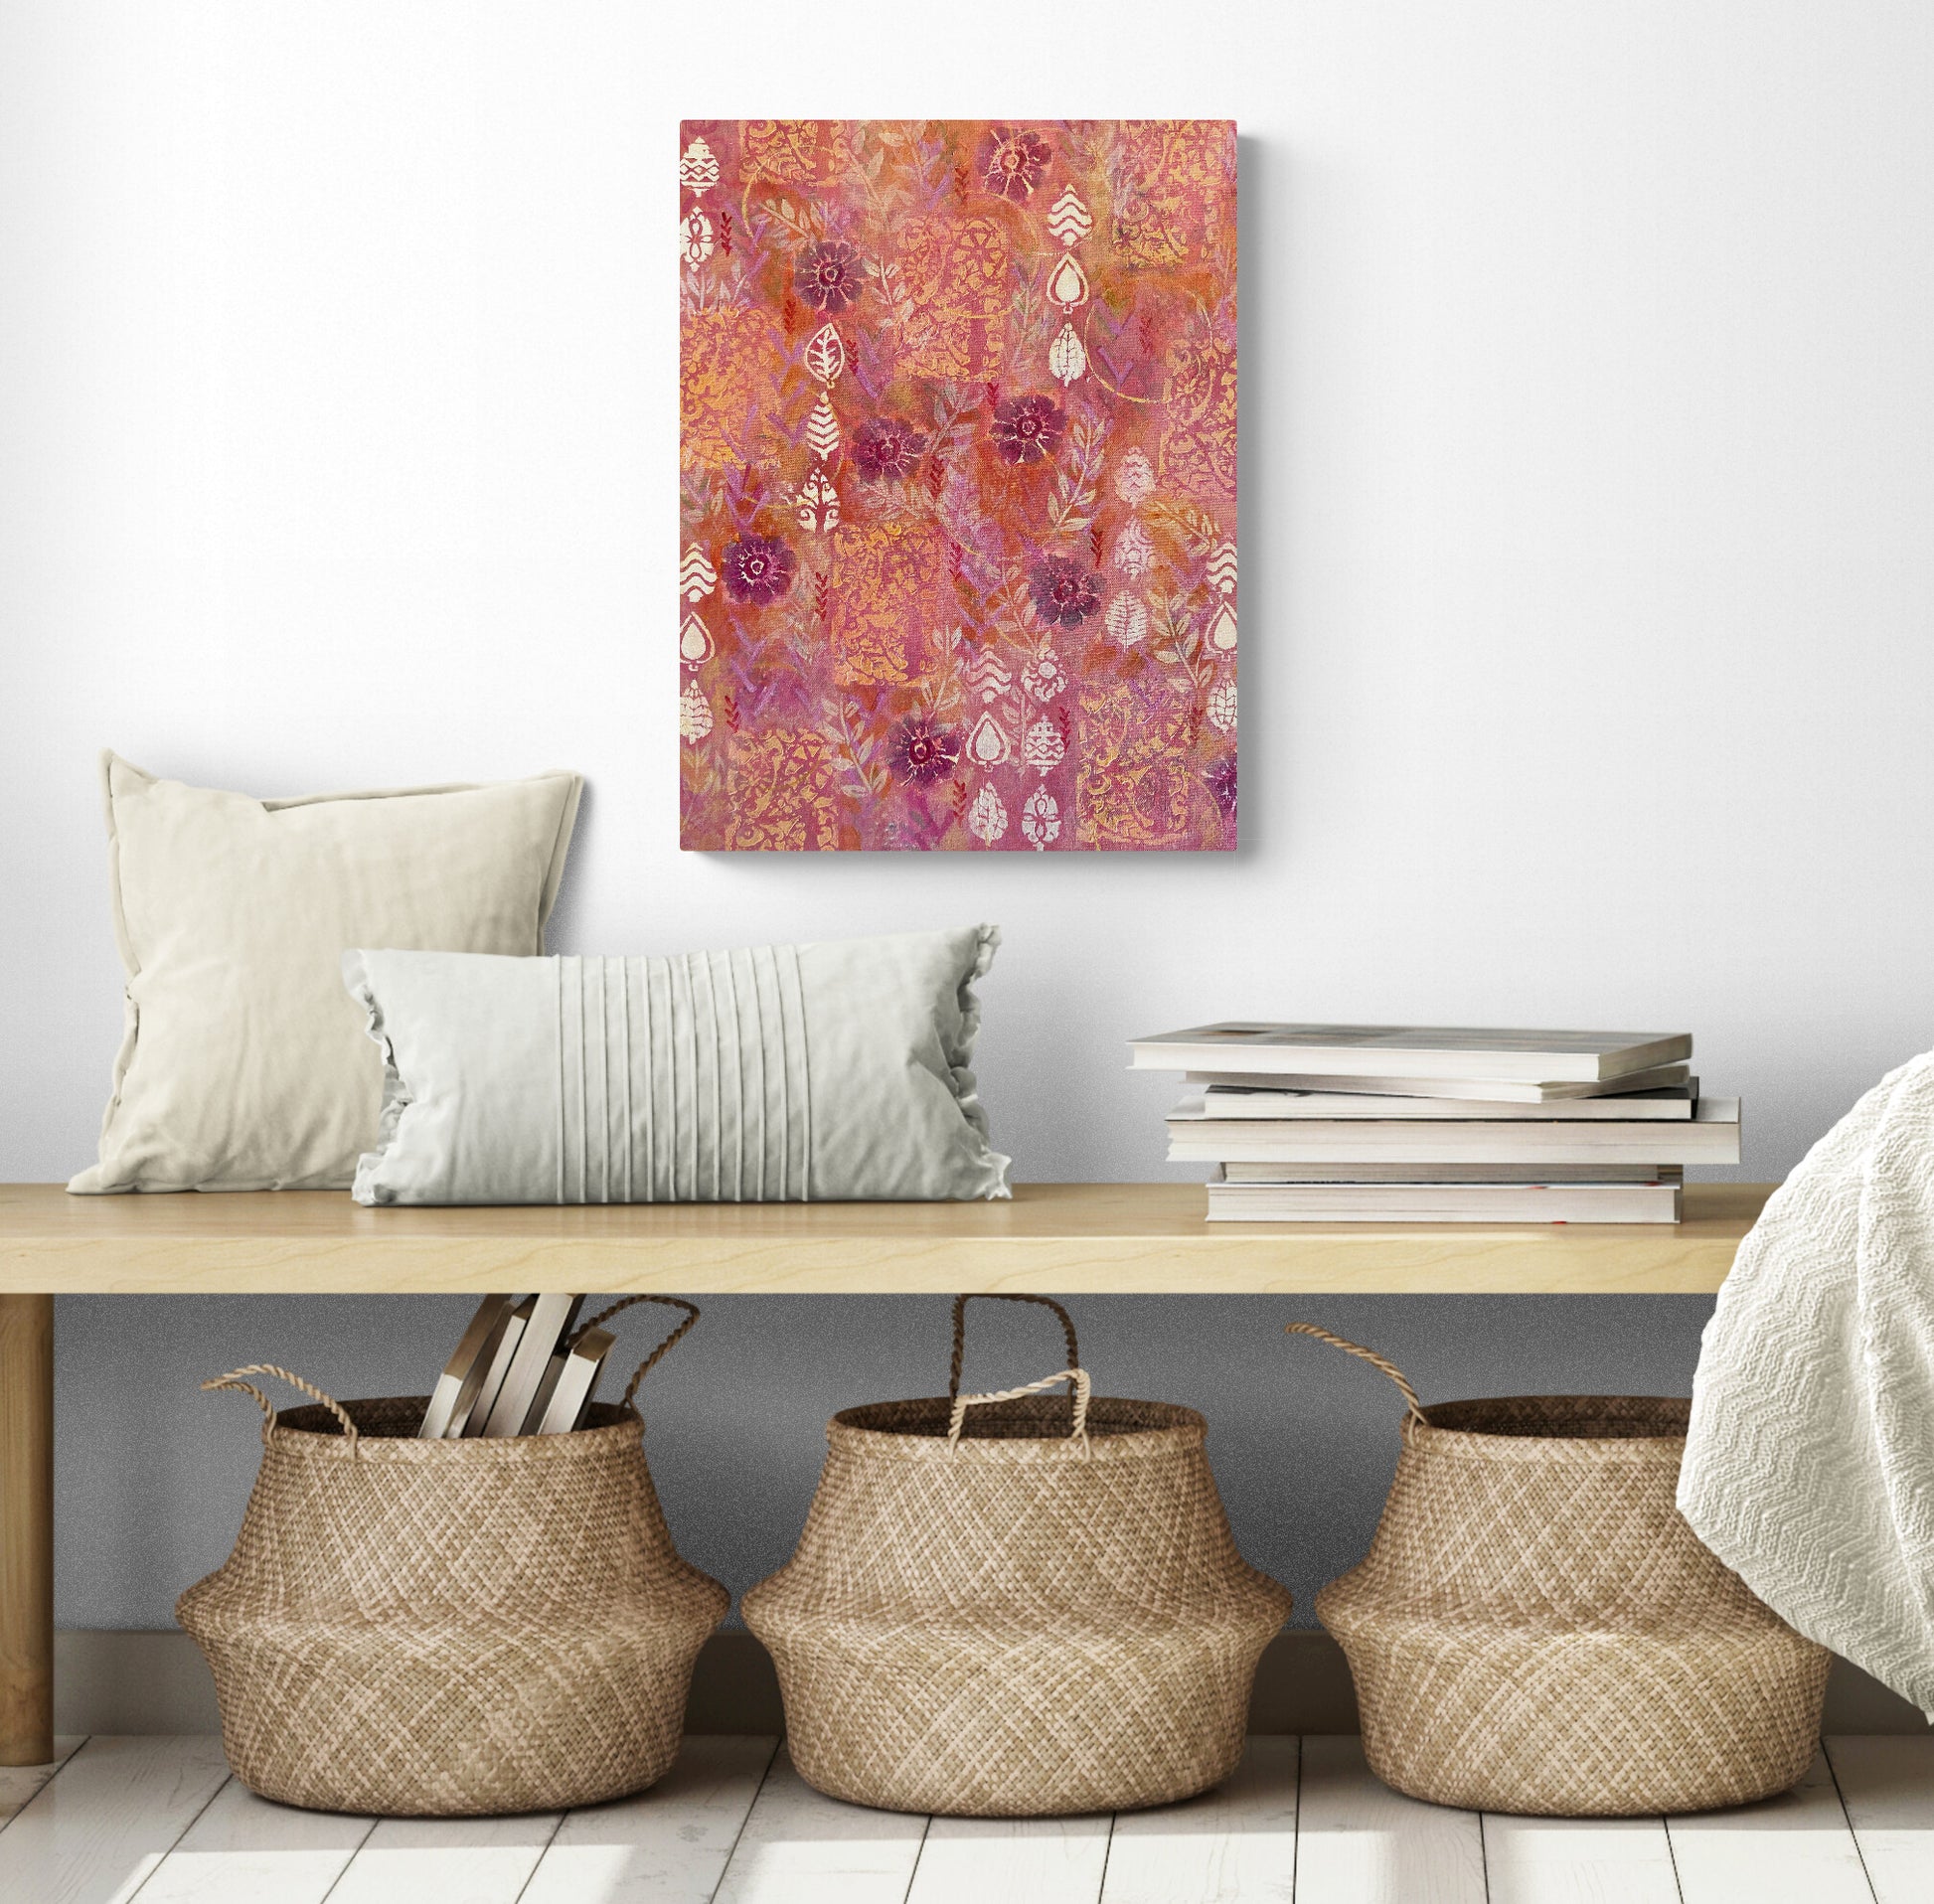 original acrylic painting on canvas dark red flowers on red background with white leaves and orange accents warm cheerful feeling shown in room with a bench and baskets